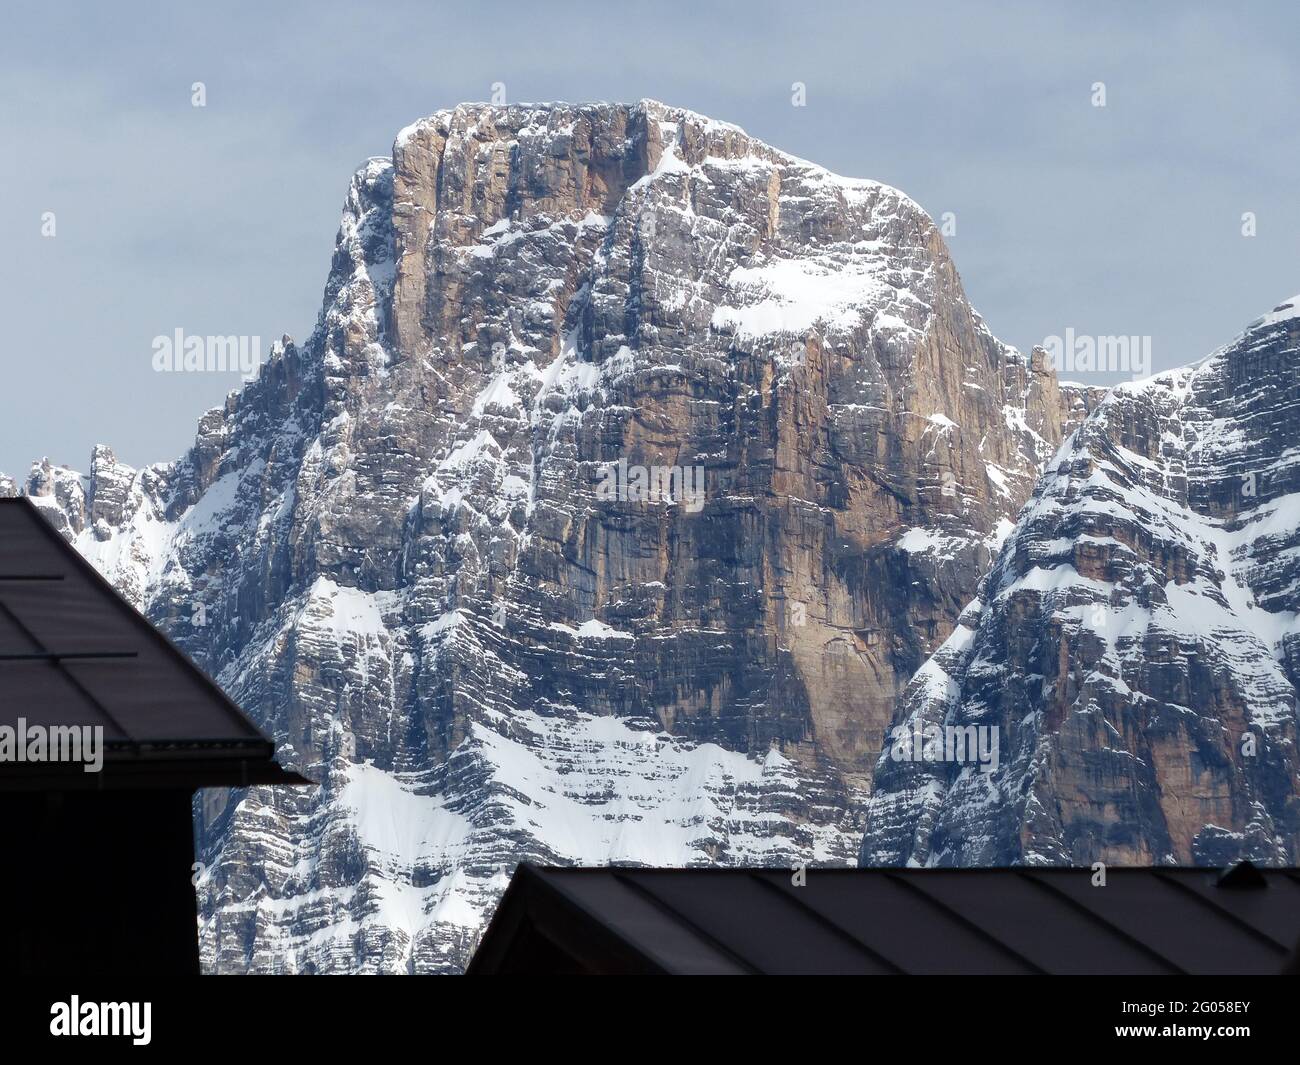 Amazing View of the Snow at Dolomites mountains In the Alps, Italy Stock Photo